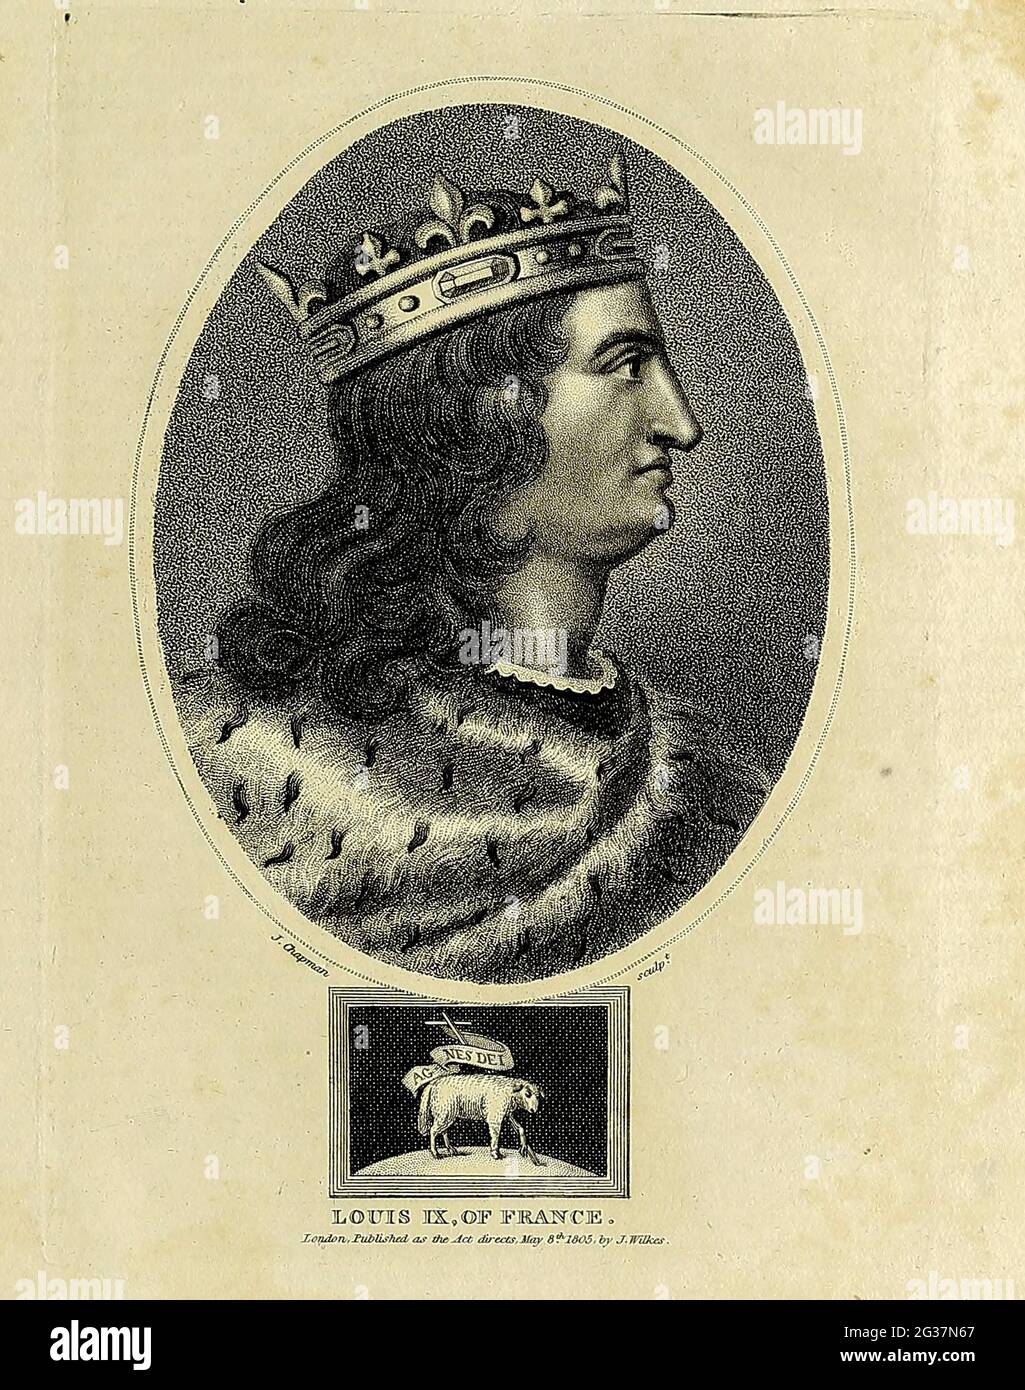 Louis IX of France Louis IX (25 April 1214 – 25 August 1270), commonly known as Saint Louis or Louis the Saint, was king of France from 1226 to 1270. Louis was crowned in Reims at the age of 12, following the death of his father Louis VIII; Louis IX led the Seventh and Eighth crusades against the Ayyubids, Bahriyya Mamluks and Hafsid Kingdom. He was captured in the first and ransomed, and he died from dysentery during the latter. He was succeeded by his son Philip III. Copperplate engraving From the Encyclopaedia Londinensis or, Universal dictionary of arts, sciences, and literature; Volume VI Stock Photo